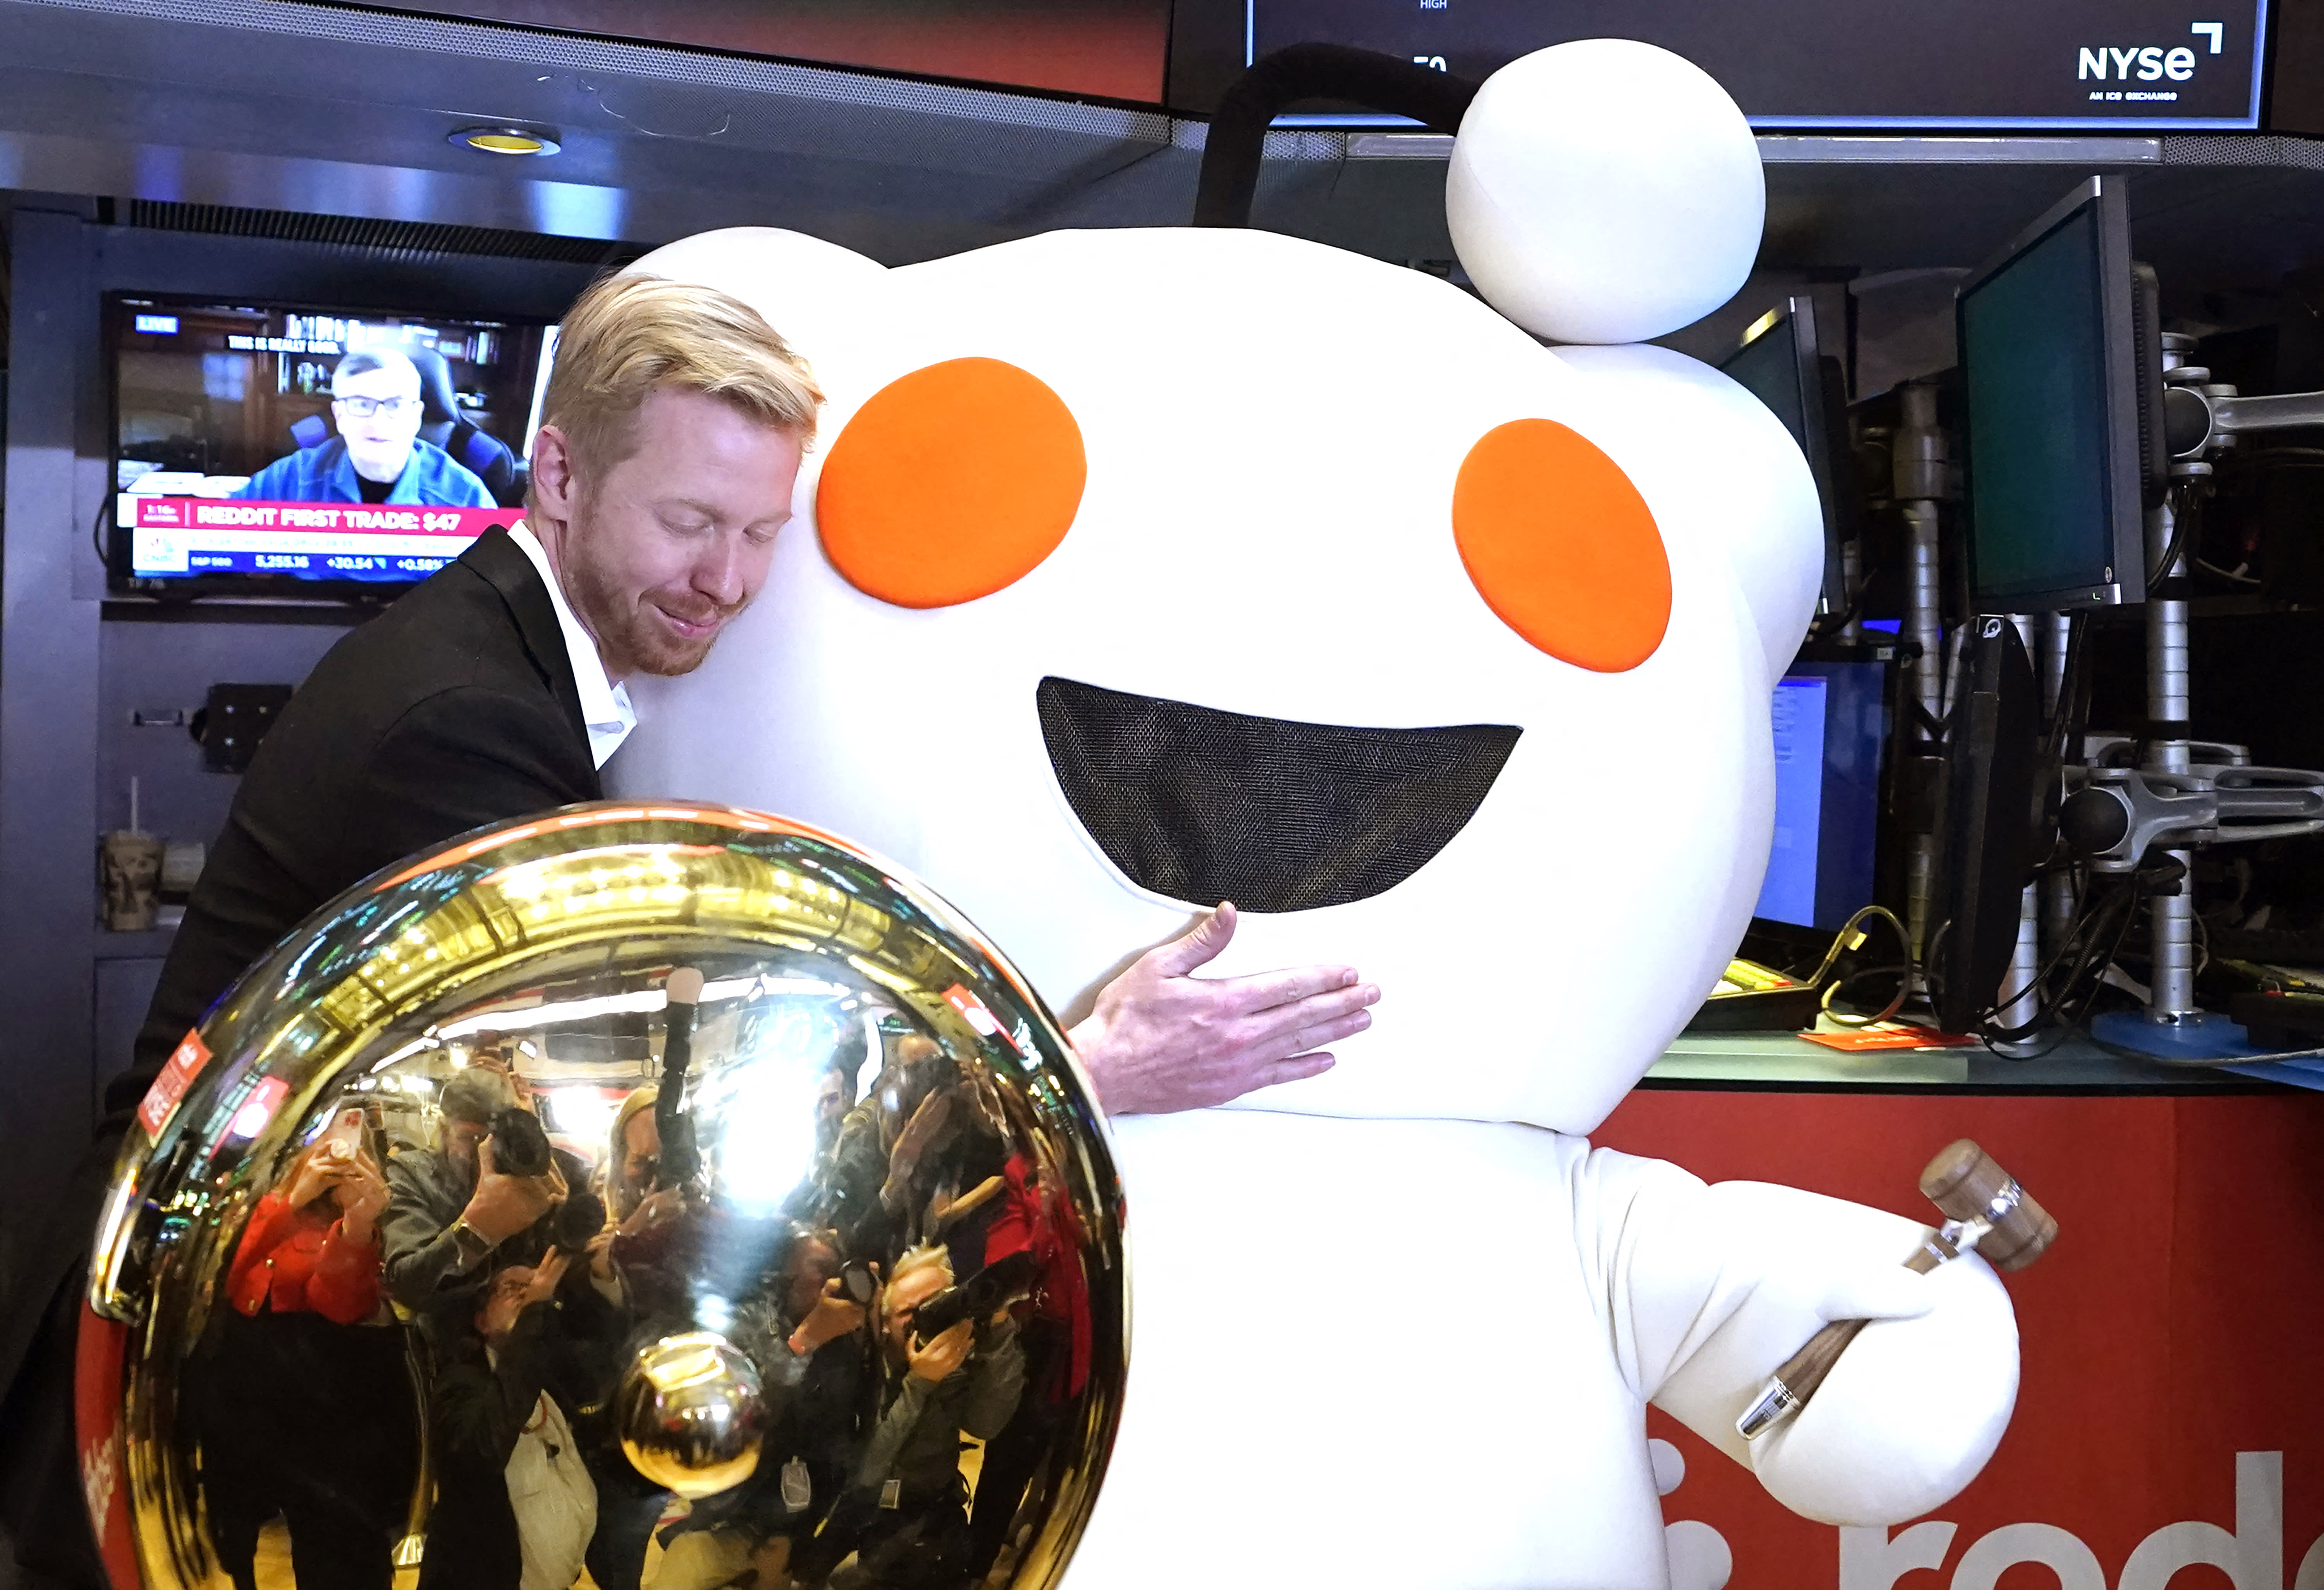 Shares of Reddit rose 30% to start the week following the social media company's IPO